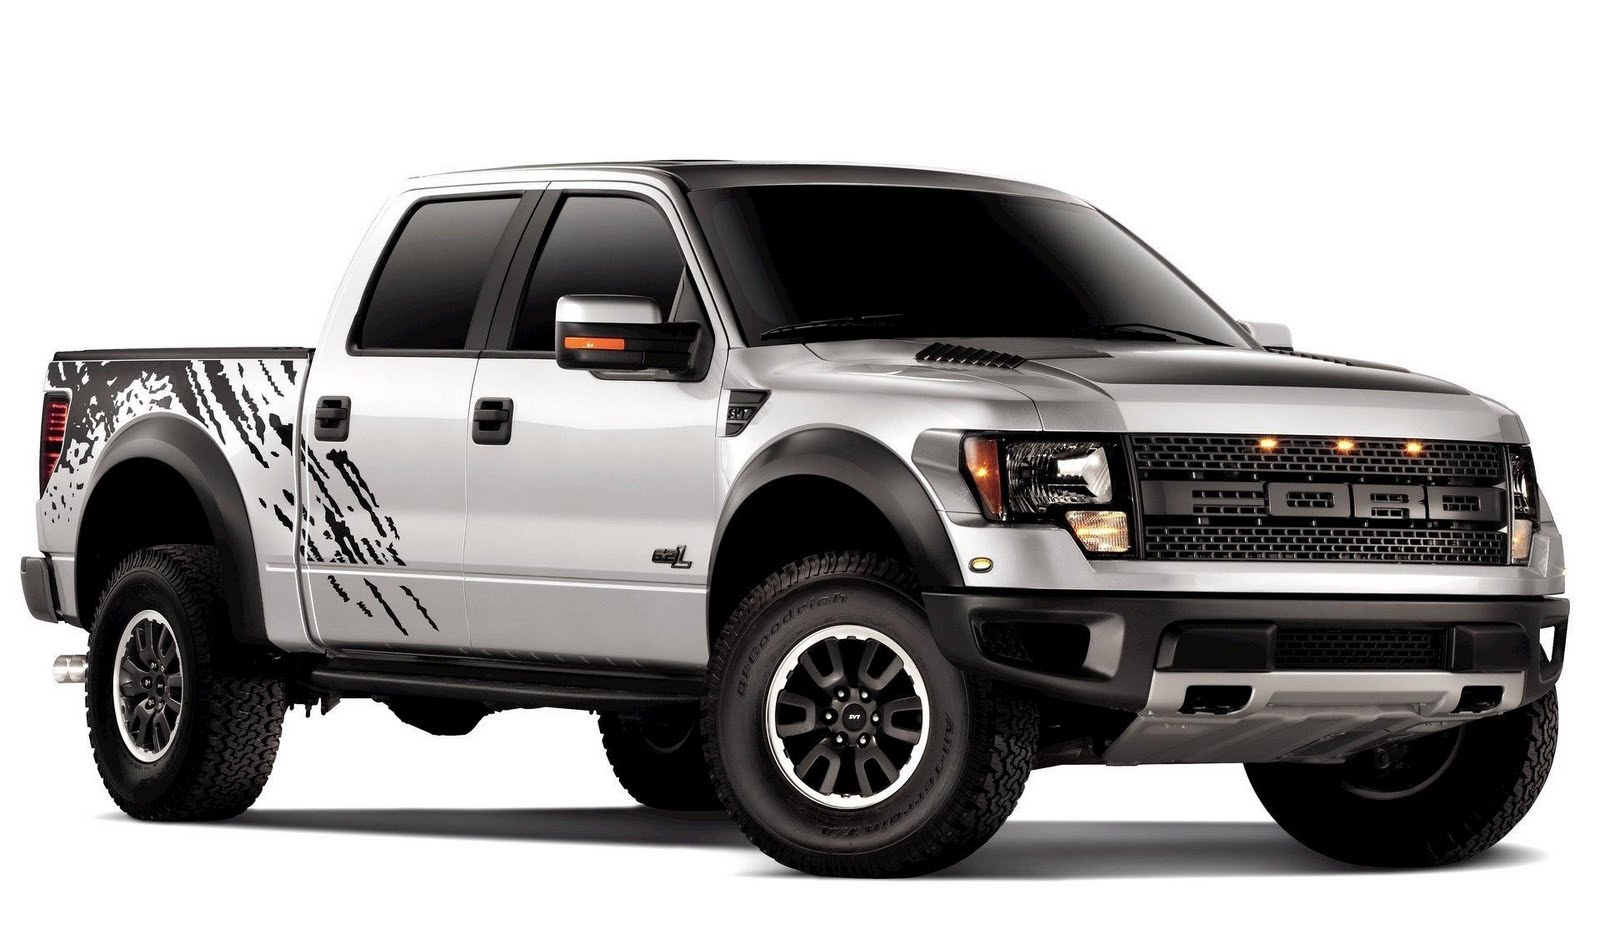 Ford Truck HD Wallpapers Ford Truck Pictures Cool Wallpapers